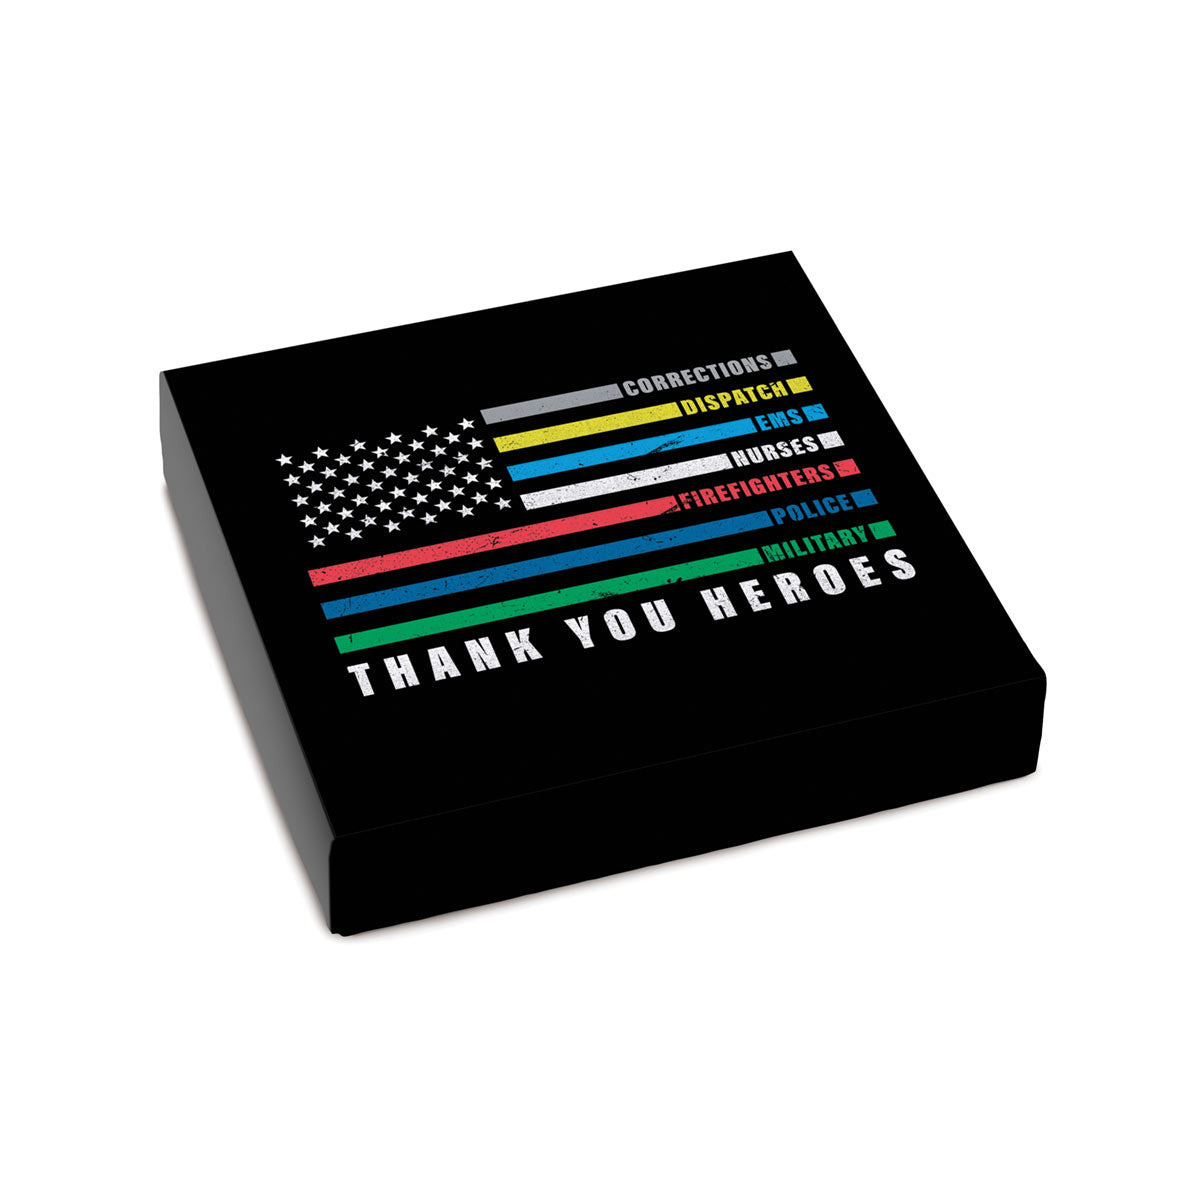 Thank You Heroes Themed Box Cover for 9 Piece Holiday Assortment